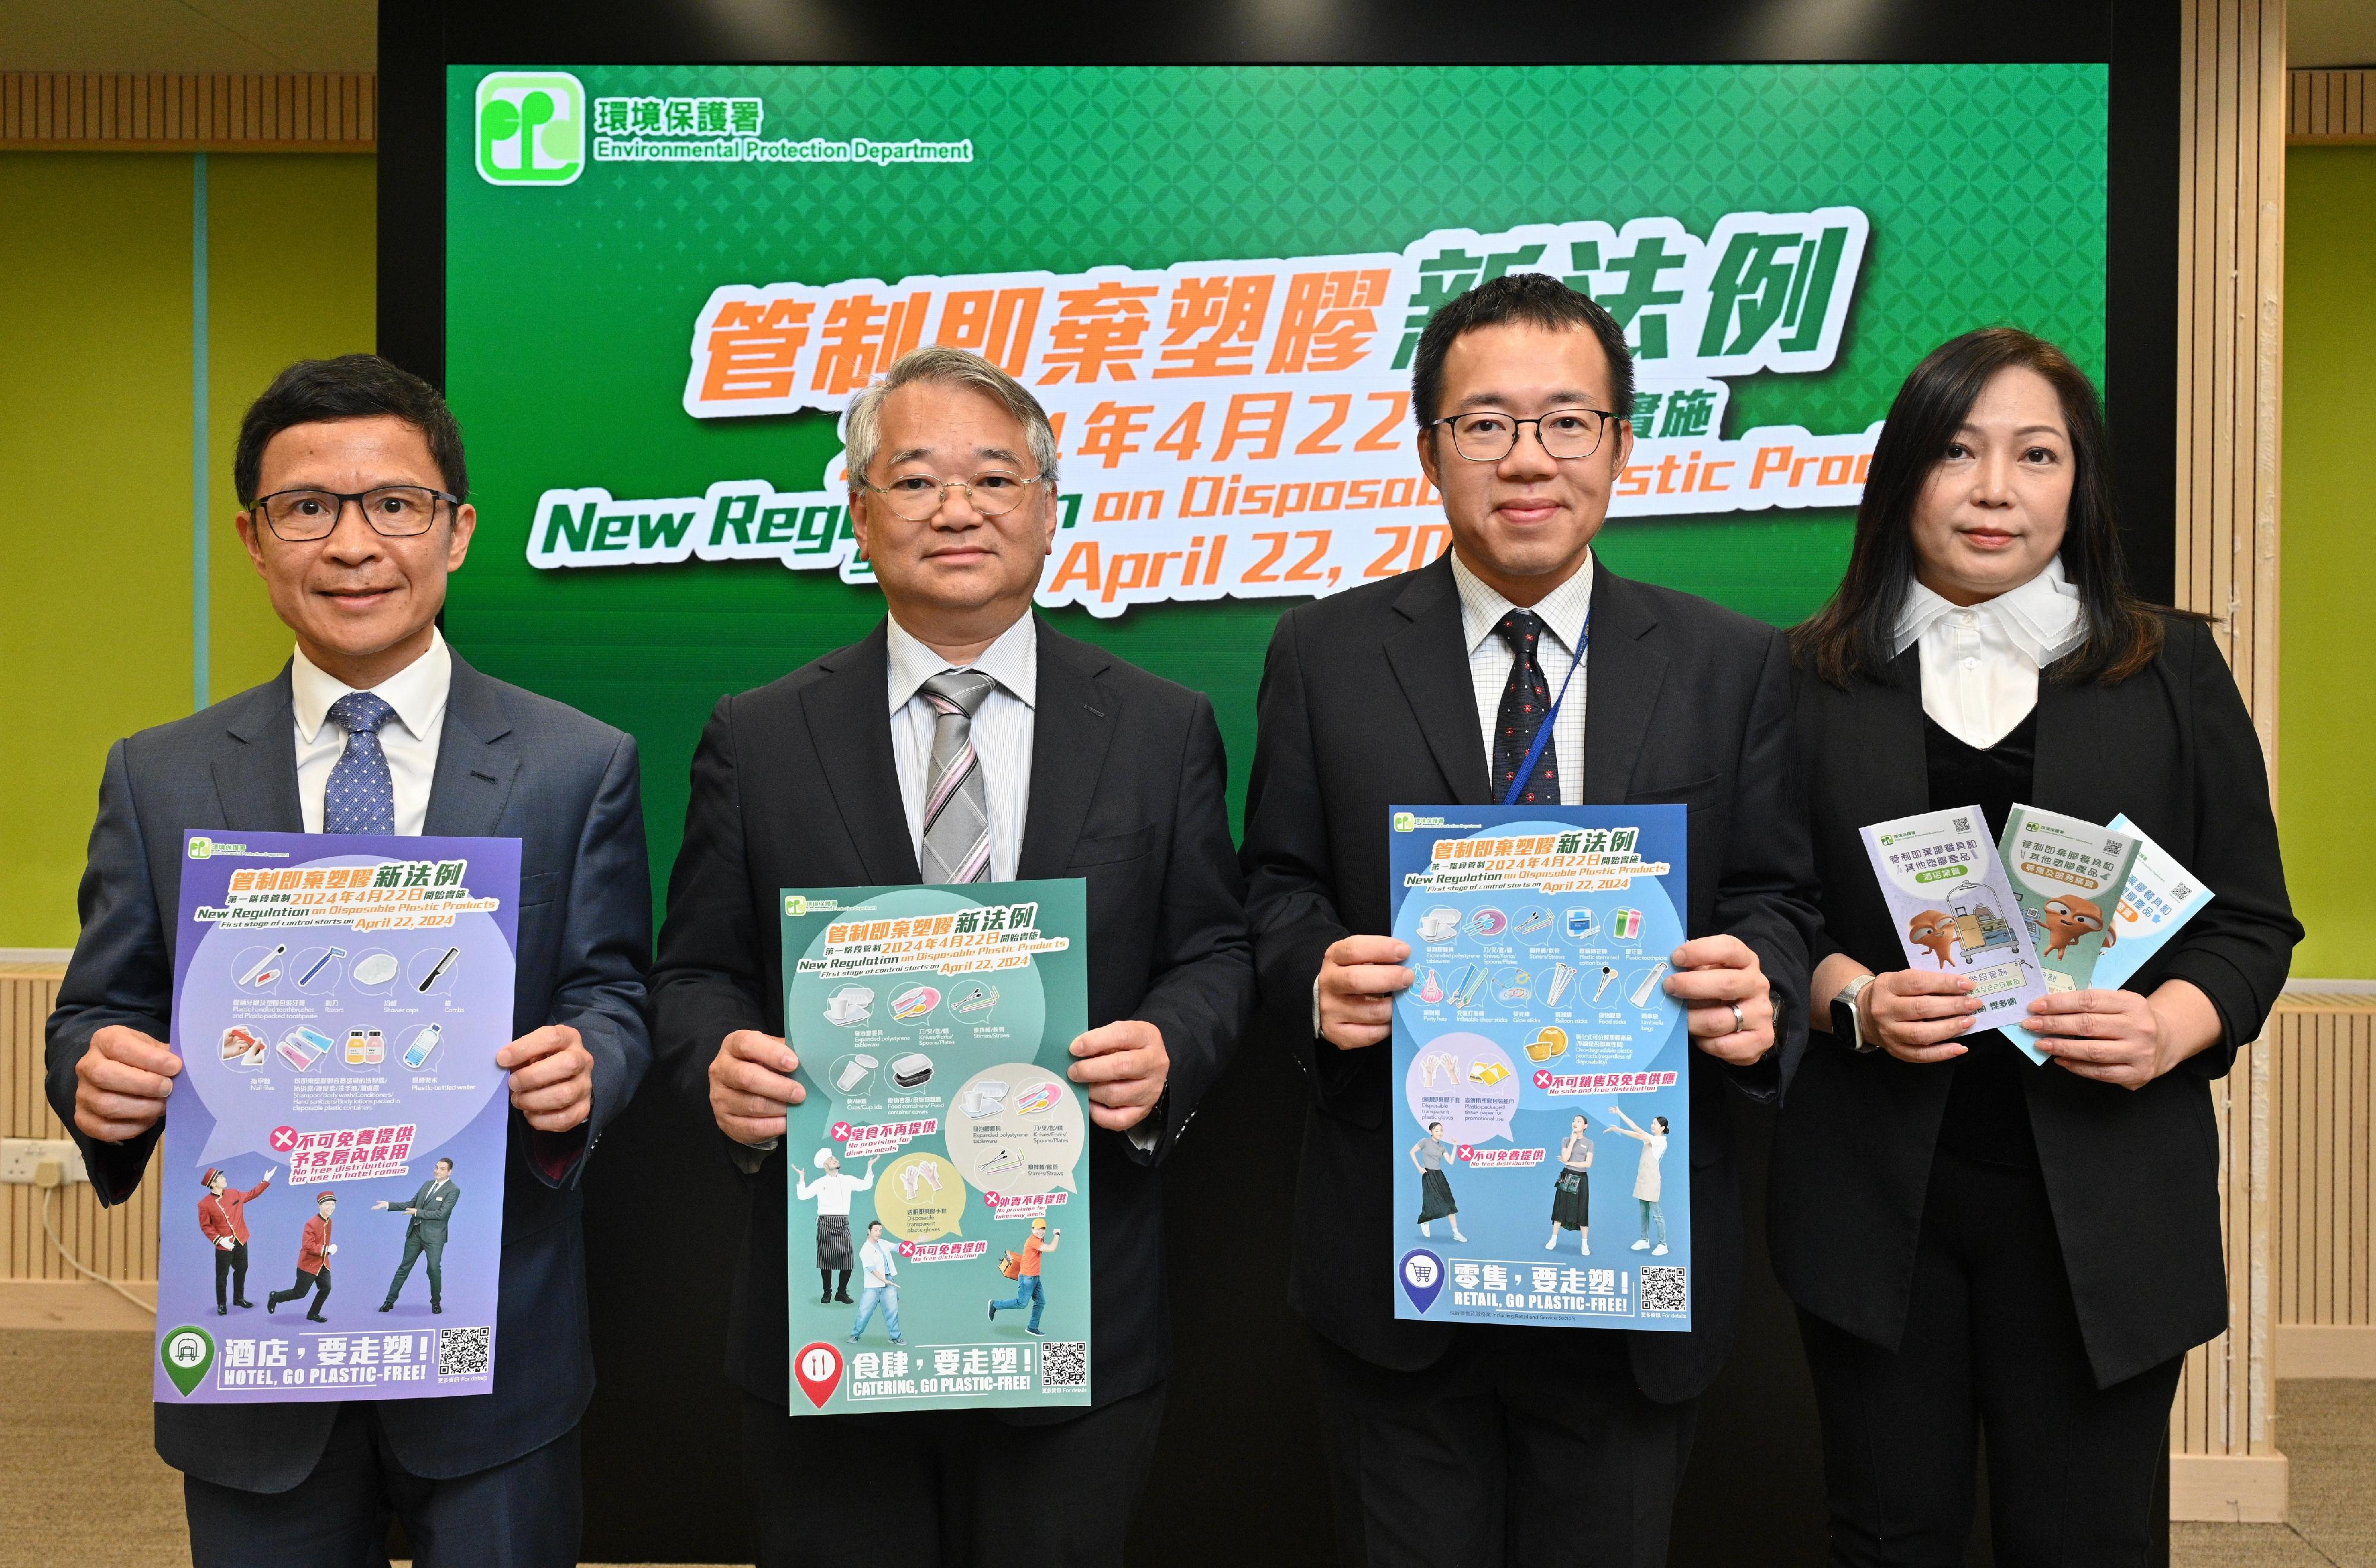 The relevant legislation for the regulation of disposable plastic tableware and other plastic products will come into effect on April 22 (Monday, Earth Day), and the first six months following the implementation will be designated as an adaptation period. The Director of Environmental Protection, Dr Samuel Chui (second left); Deputy Director of Environmental Protection Mr Raymond Wu (second right); Assistant Director of Environmental Protection (Waste Management) Mr Kenneth Cheng (first left) and Assistant Director of Environmental Protection (Special Duties) Ms Joanne Yung (first right), attended a briefing session today (April 12) on the arrangements for the adaptation period and the publicity and education work items on the commencement of the new regulation.